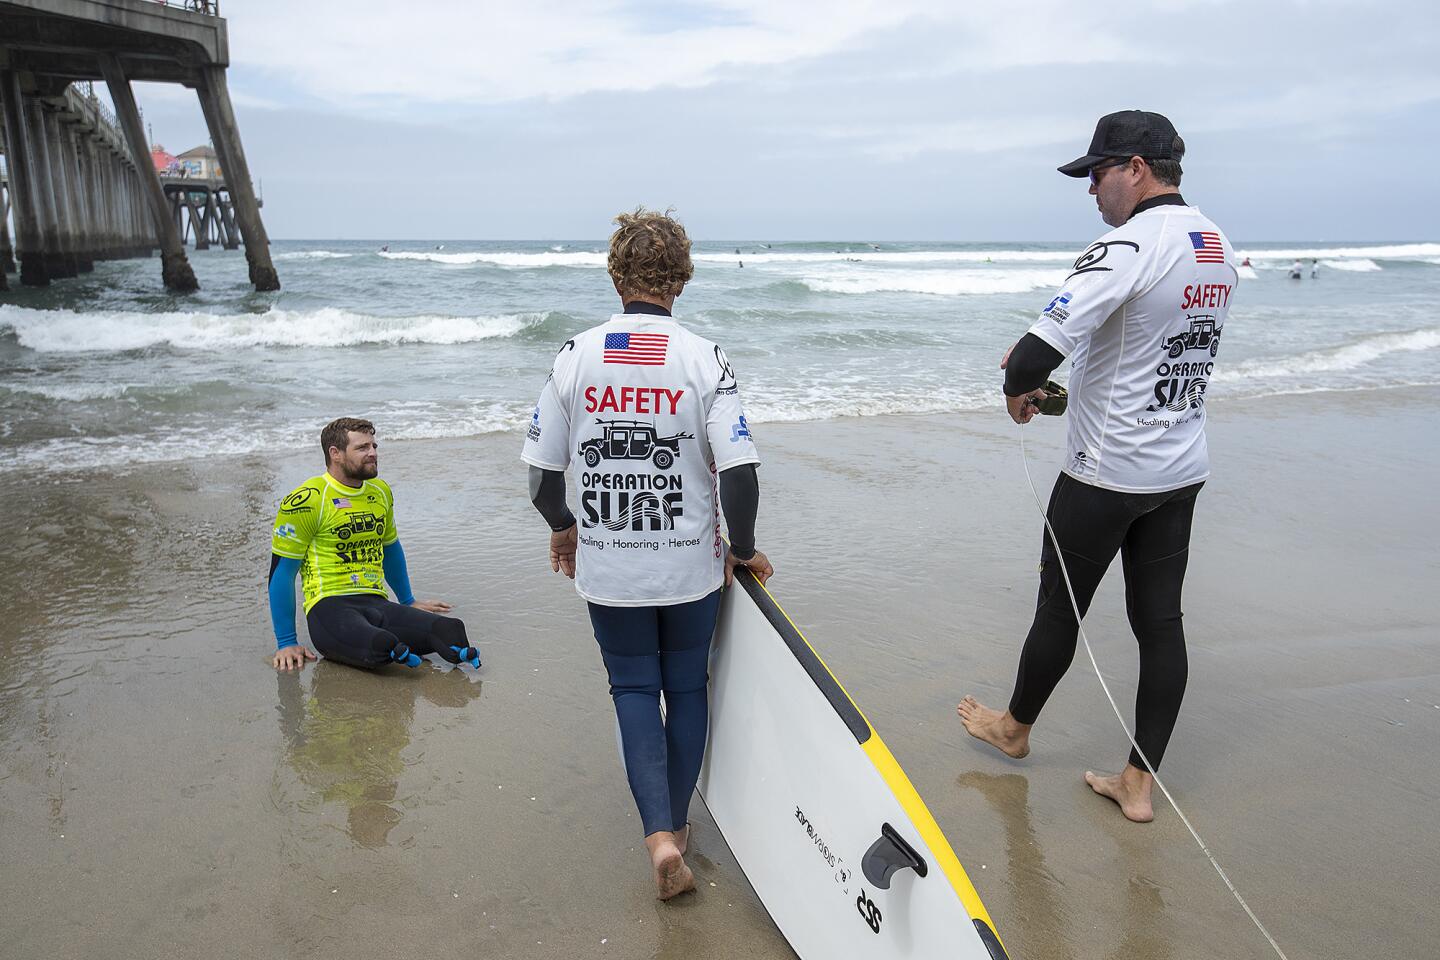 Caleb Brewer, left, of the U.S. Army, prepares to go out in the surf with assistance from volunteers Pops, center, and Jeff Porhaska, right, during the 2nd Annual Operation Surf in Huntington Beach on Monday , June 4.